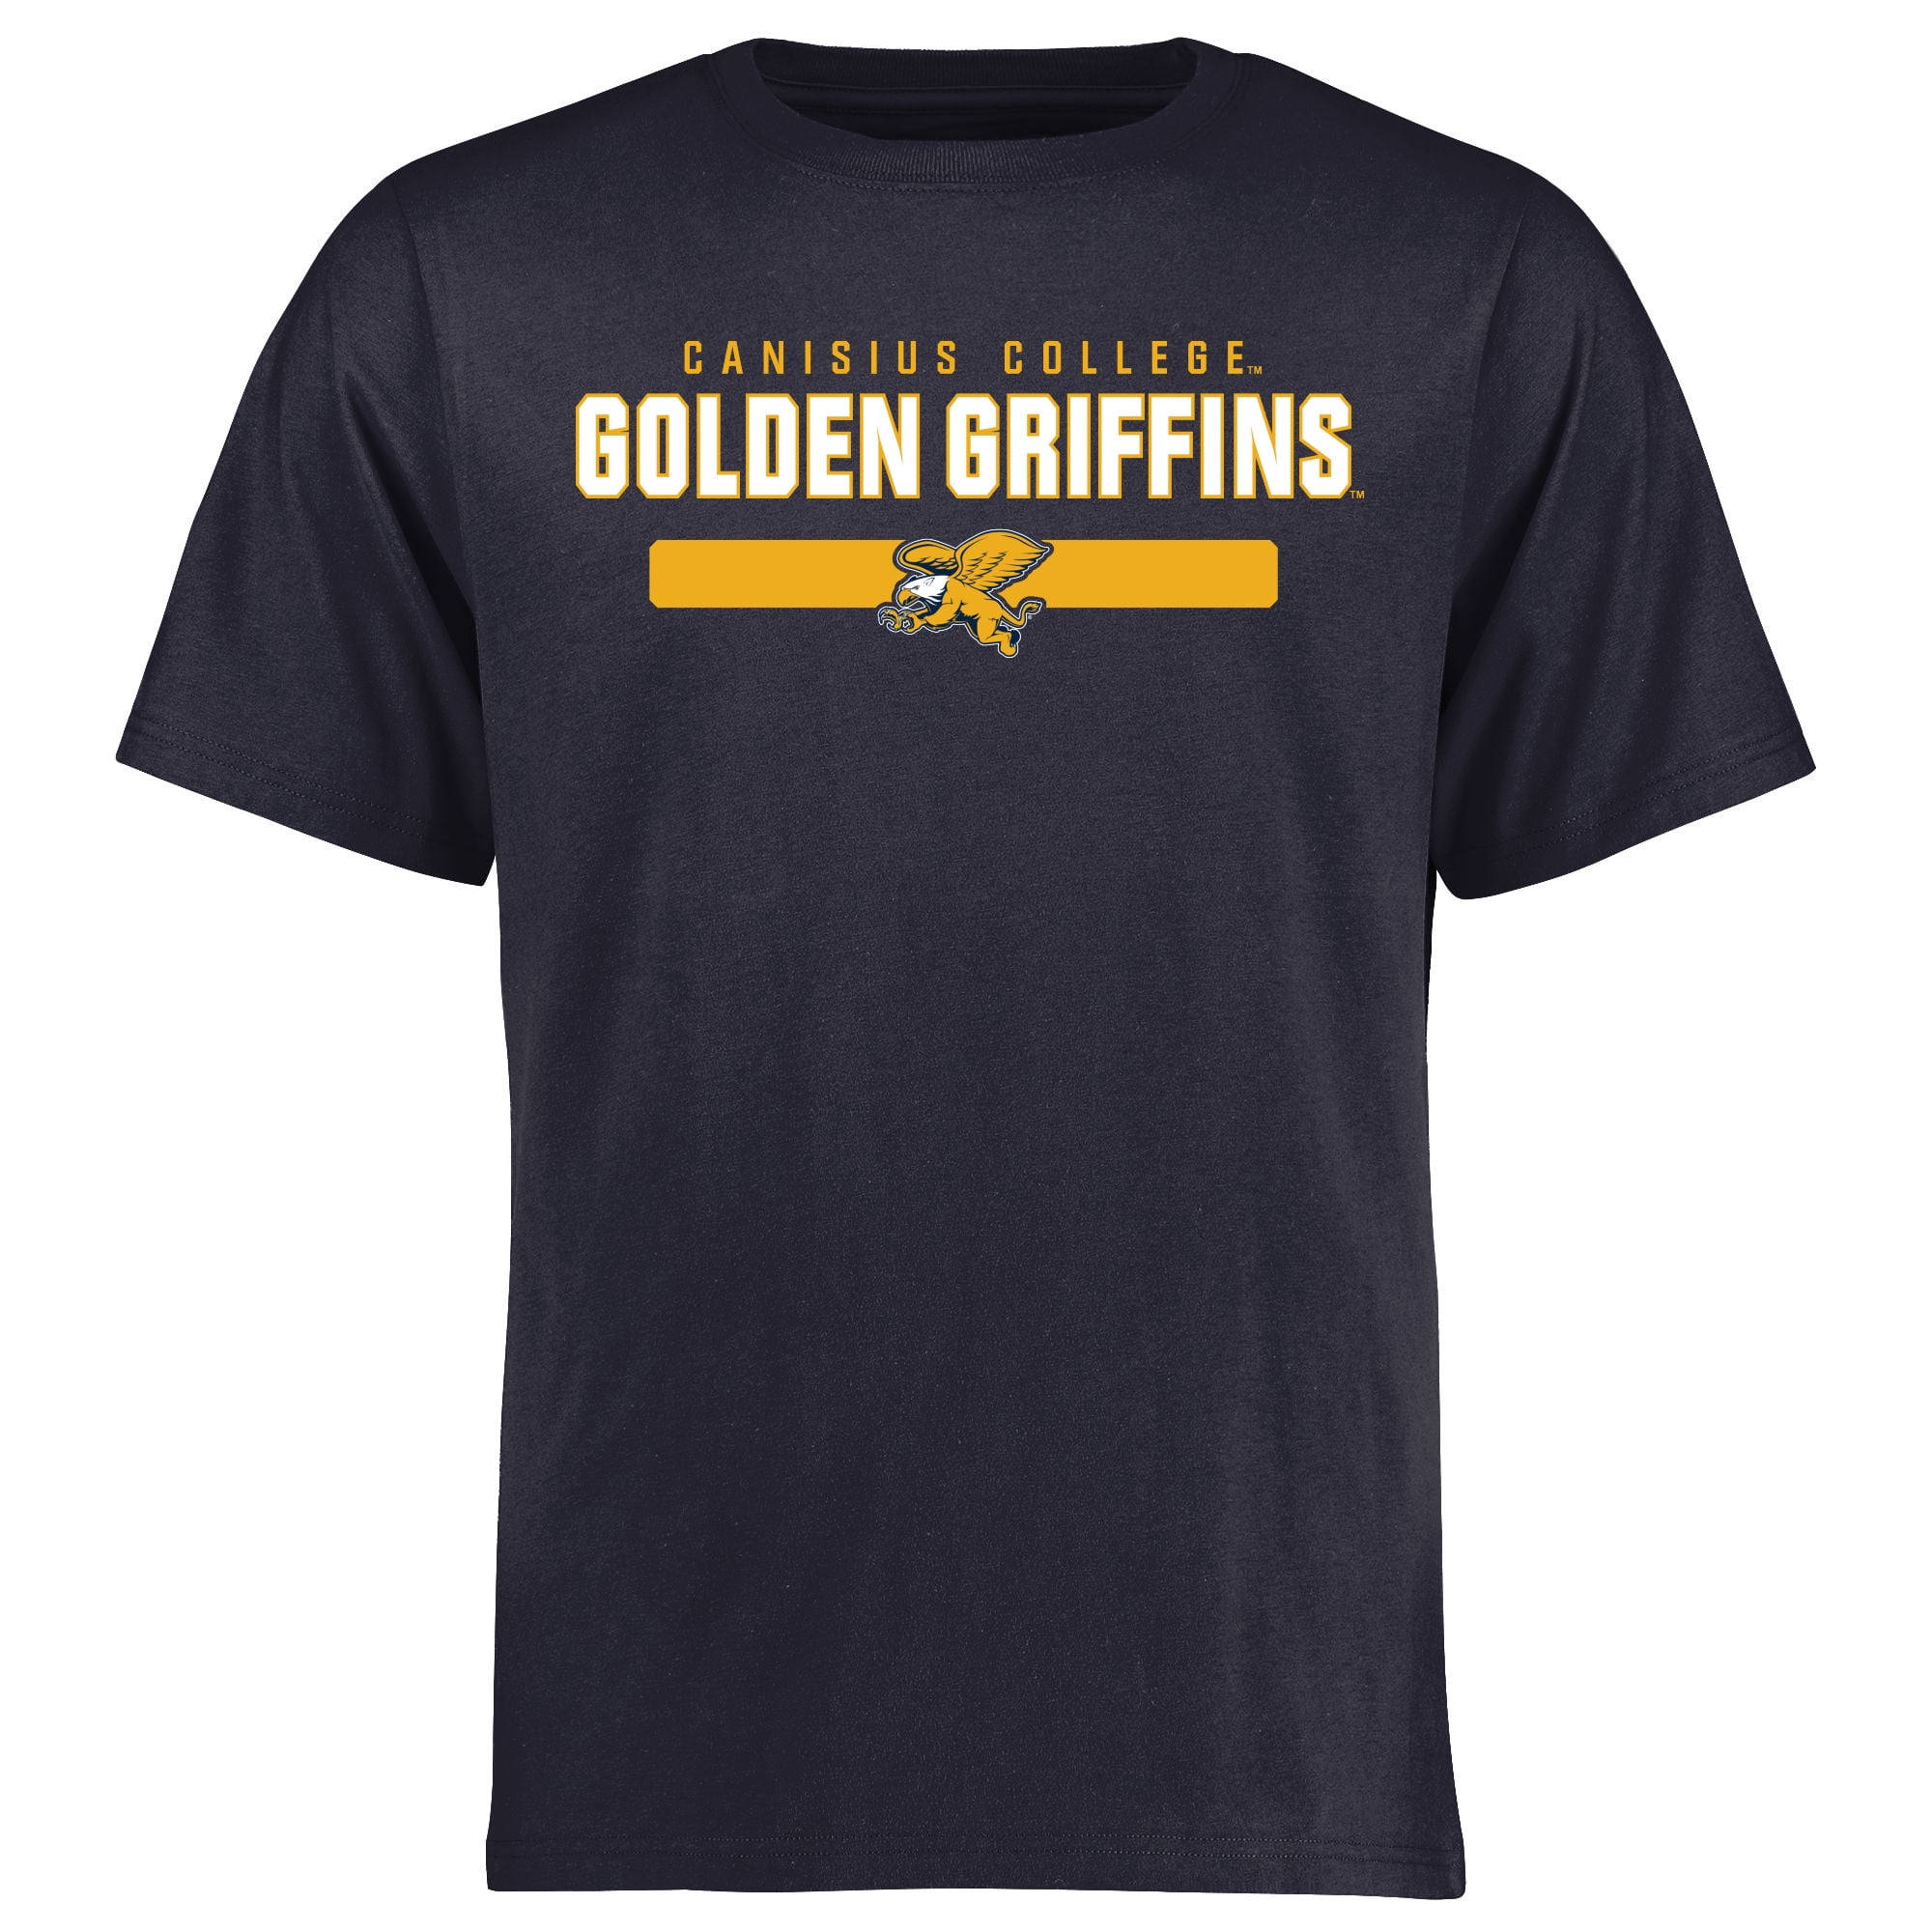 Fanatics - Canisius College Golden Griffins Team Strong T-Shirt - Navy ...